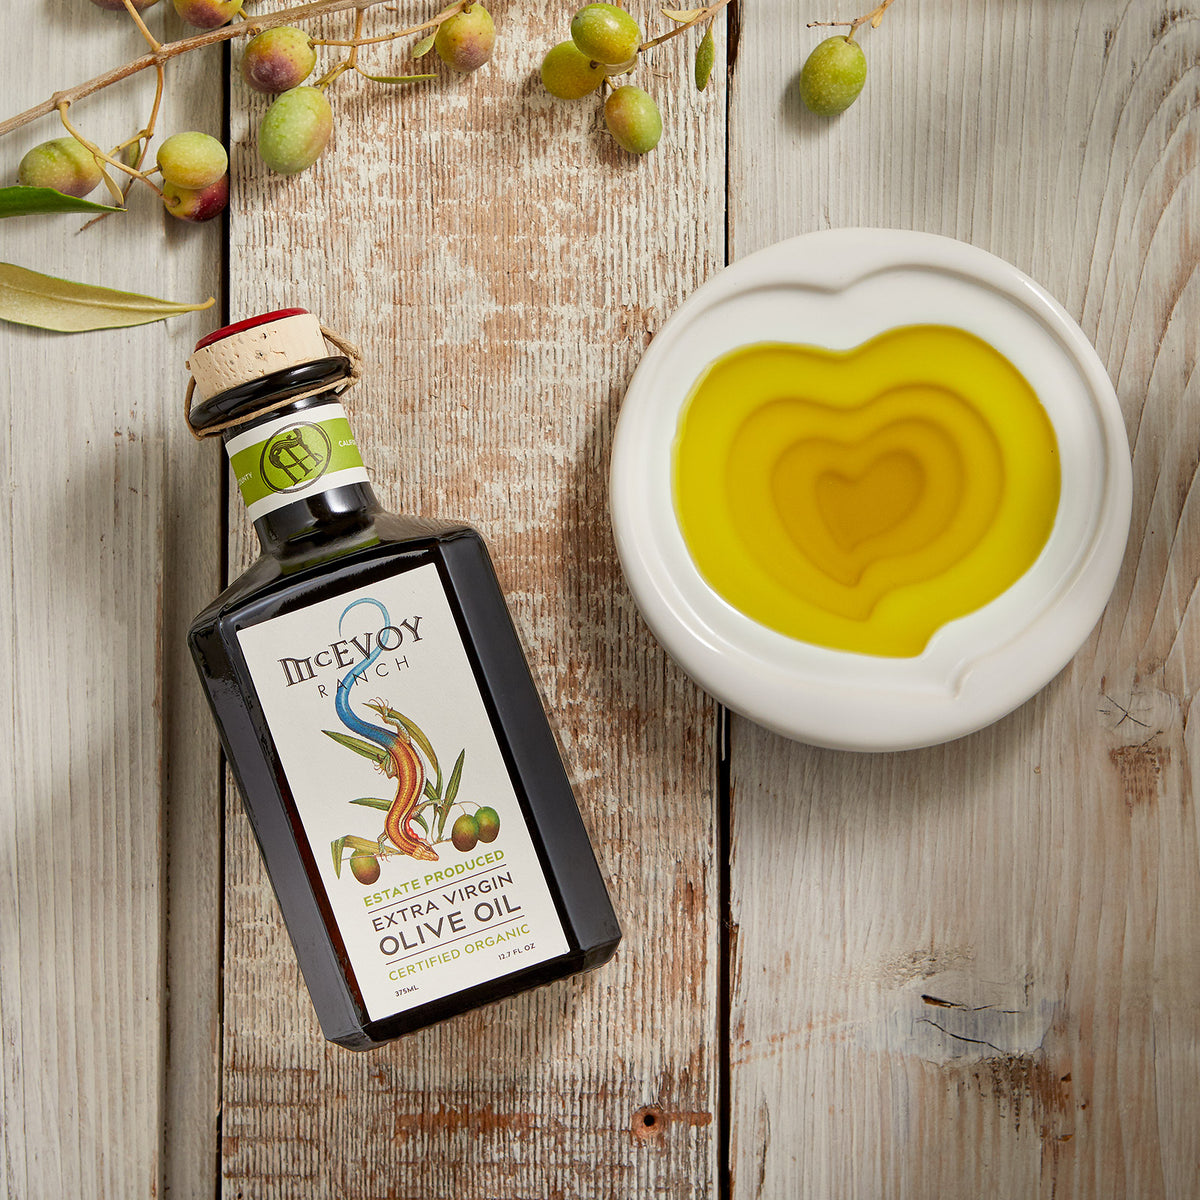 Heart Olive Oil Dipping Dish